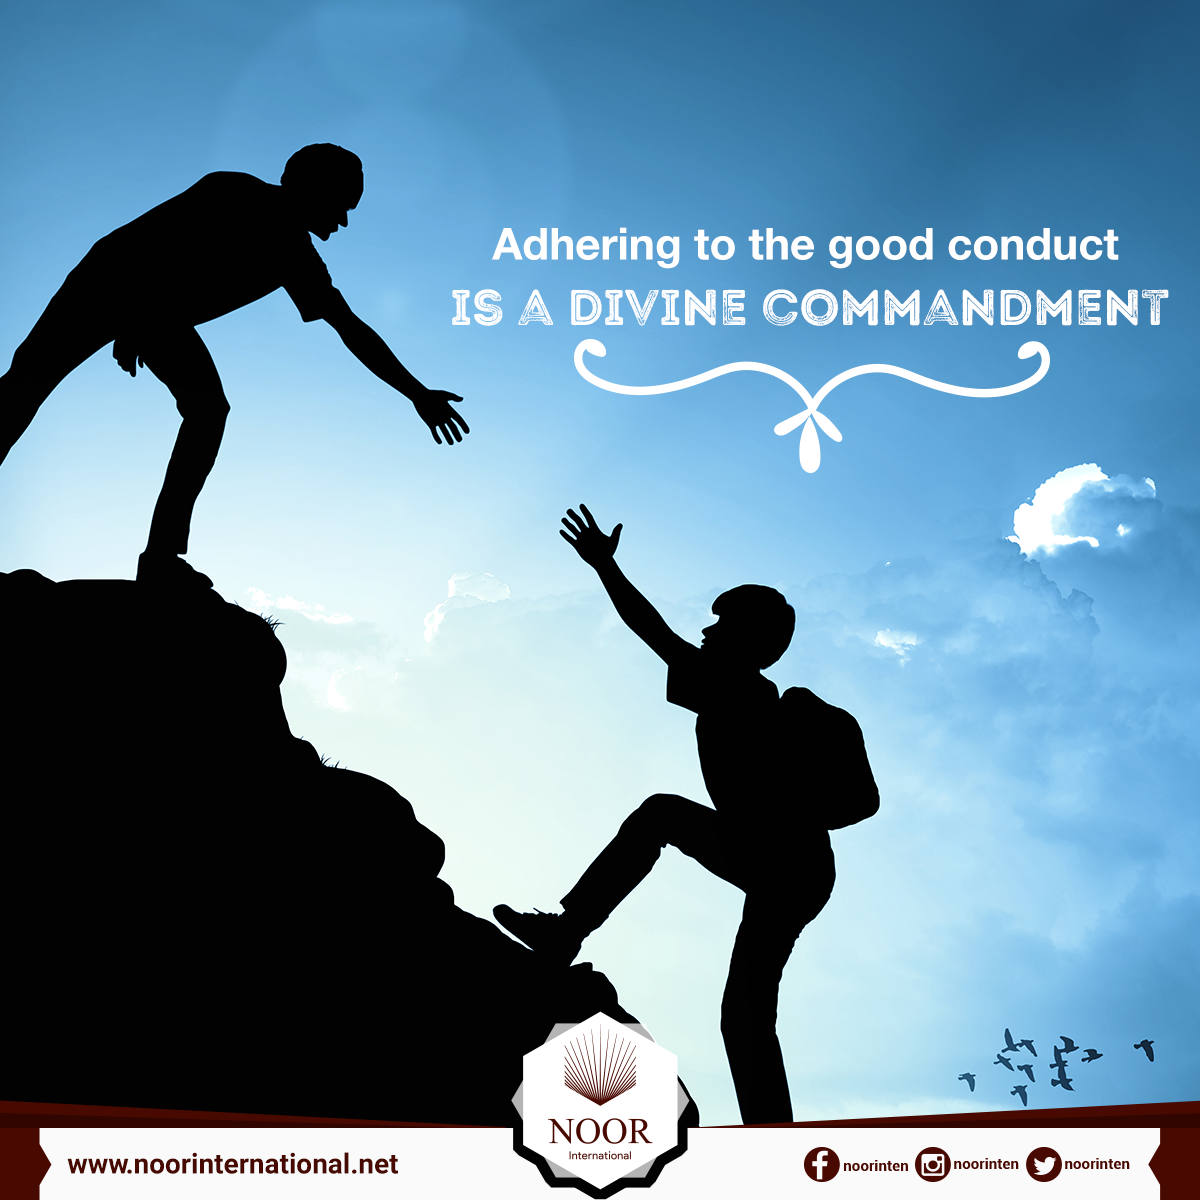 Adhering to the good conduct is a divine commandment